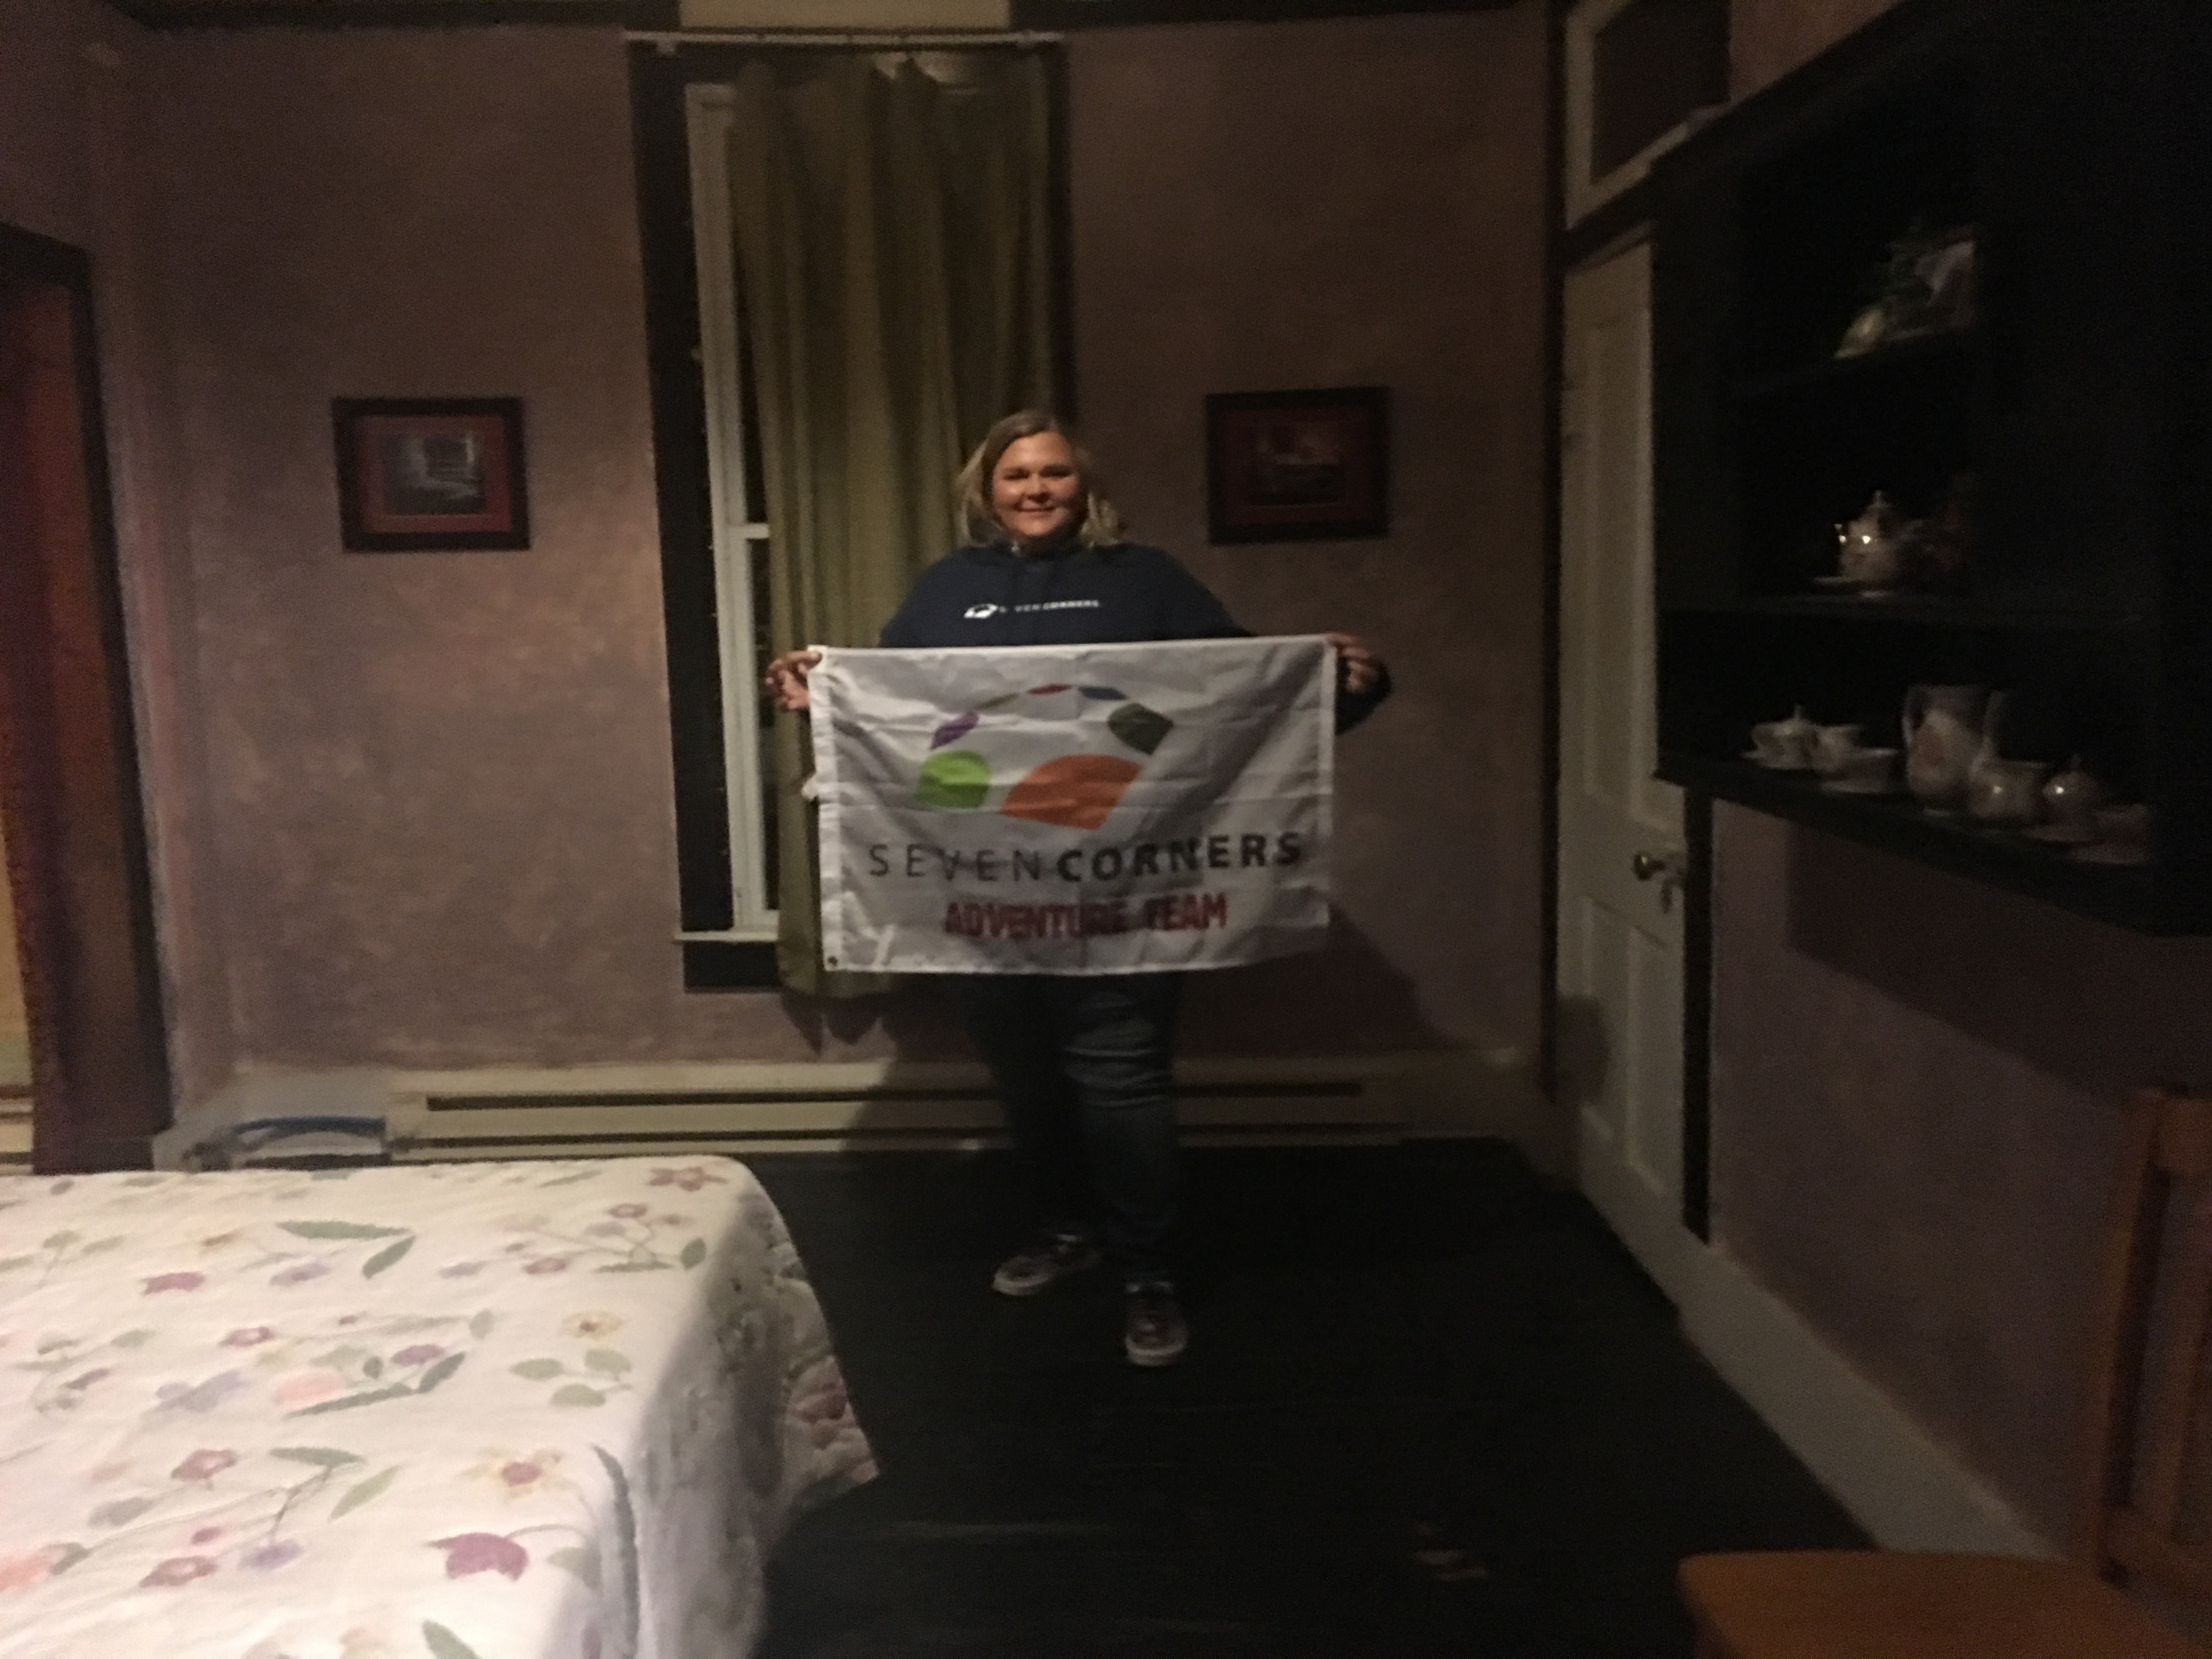 Amanda-poses-with-the-Seven-Corners-flag-in-haunted-hotel